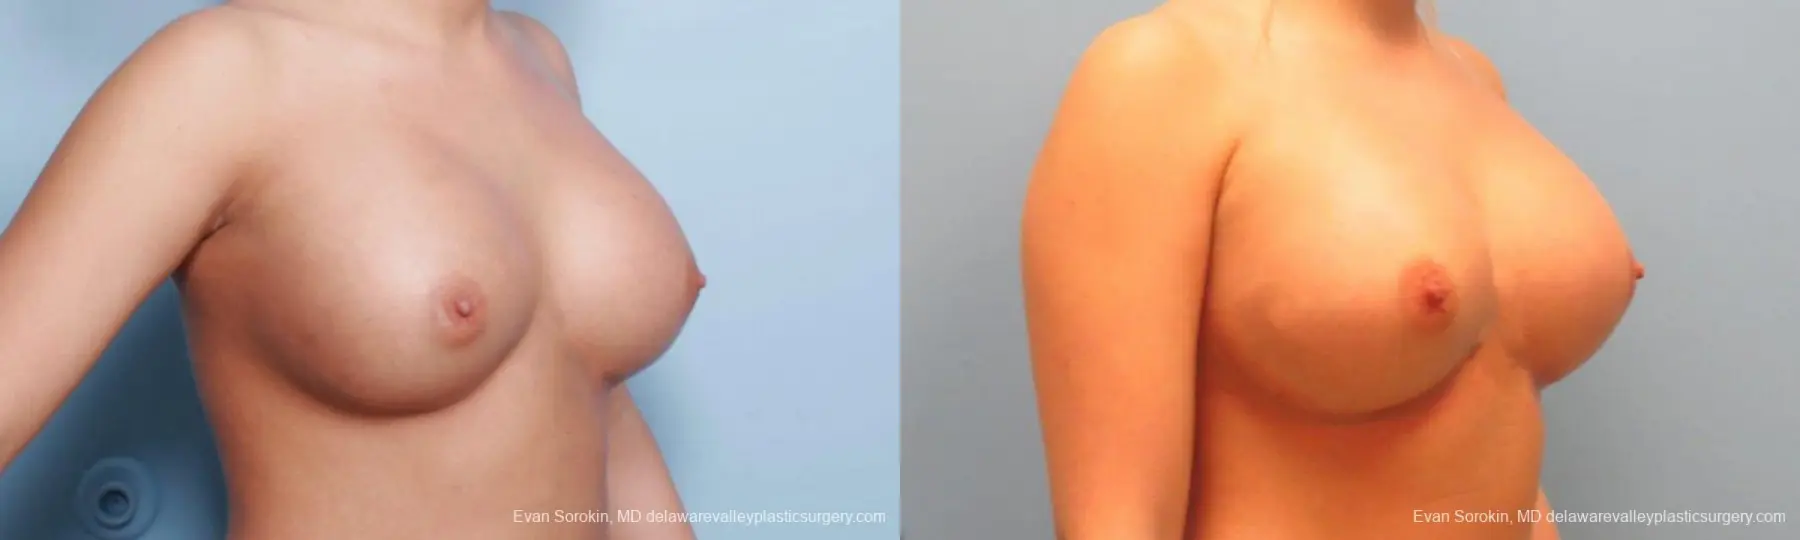 Philadelphia Breast Augmentation 9394 - Before and After 2